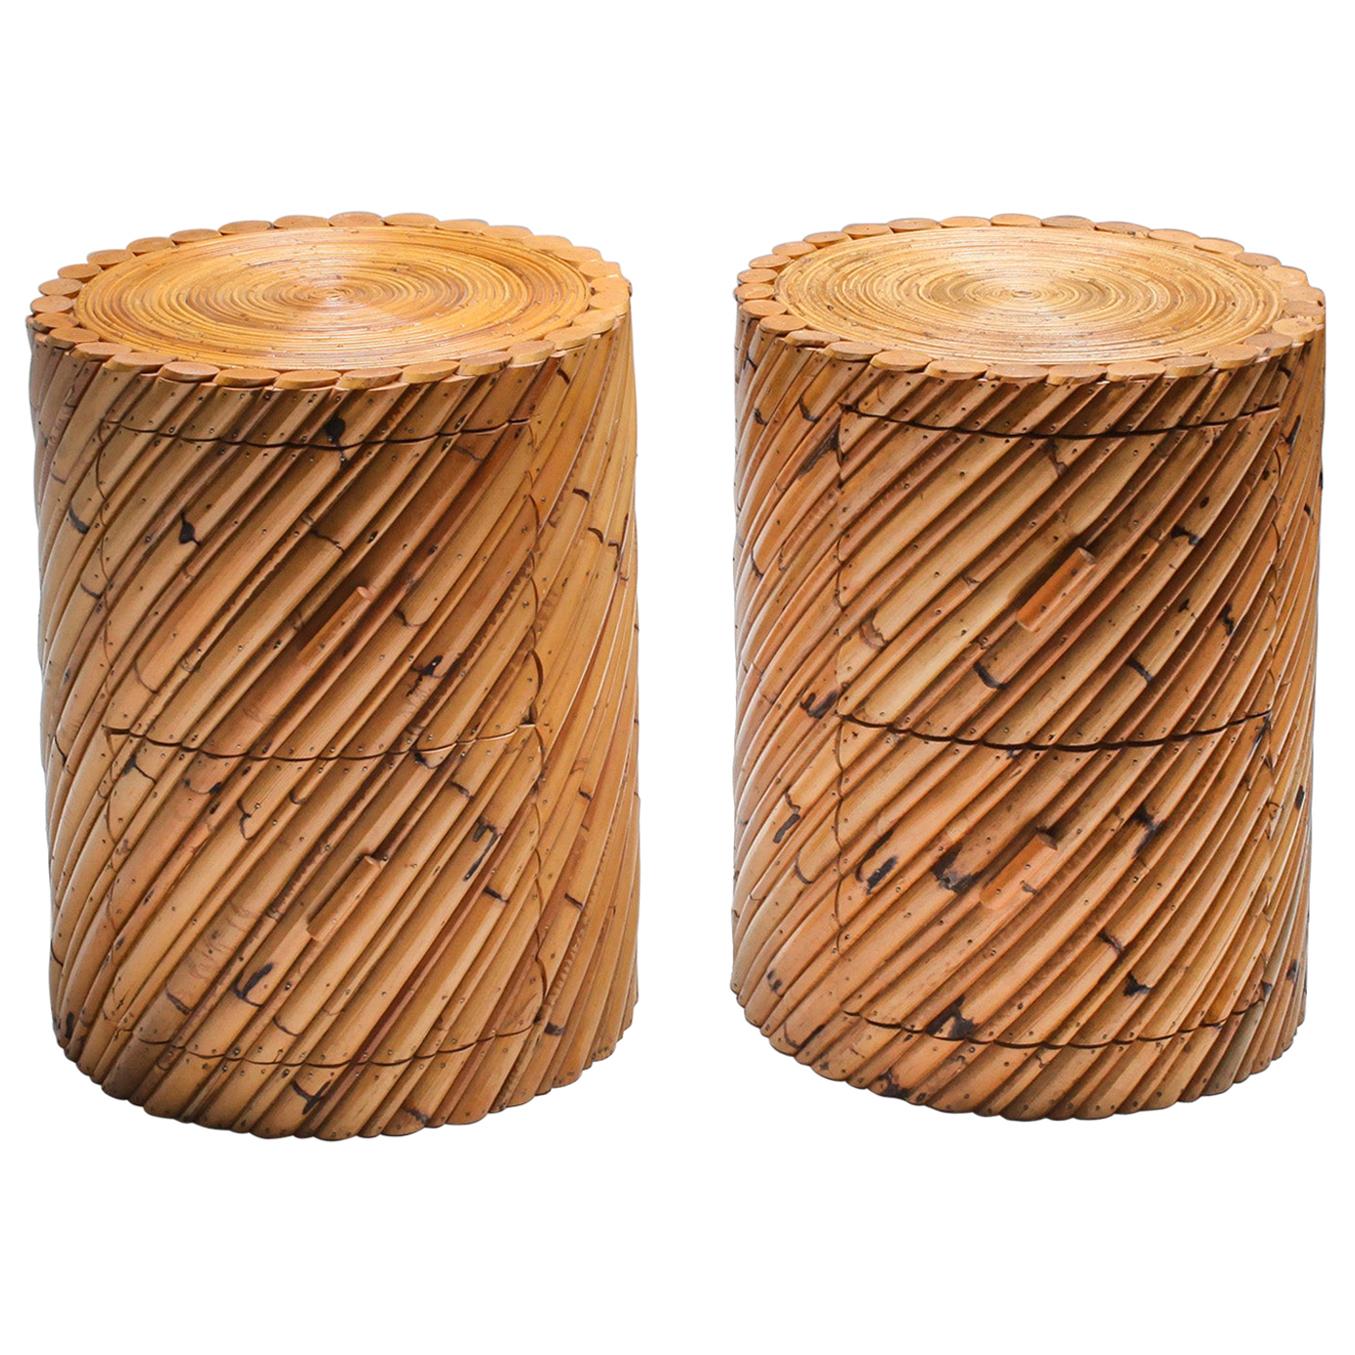 Vivai del Sud Pair of Side Tables